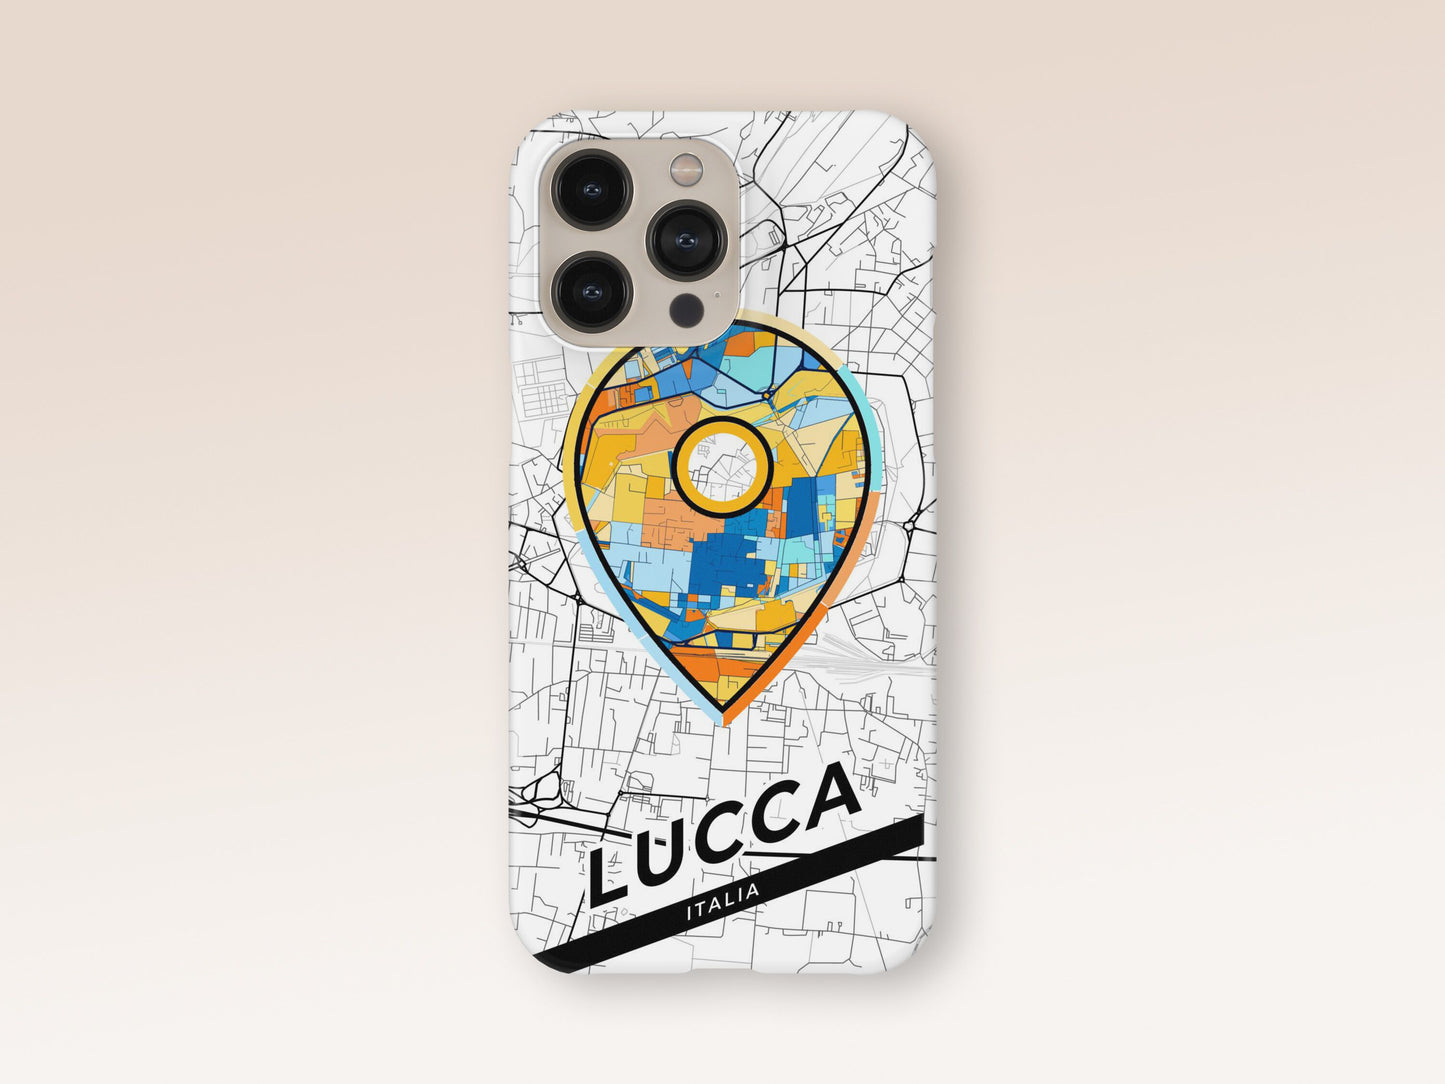 Lucca Italy slim phone case with colorful icon. Birthday, wedding or housewarming gift. Couple match cases. 1